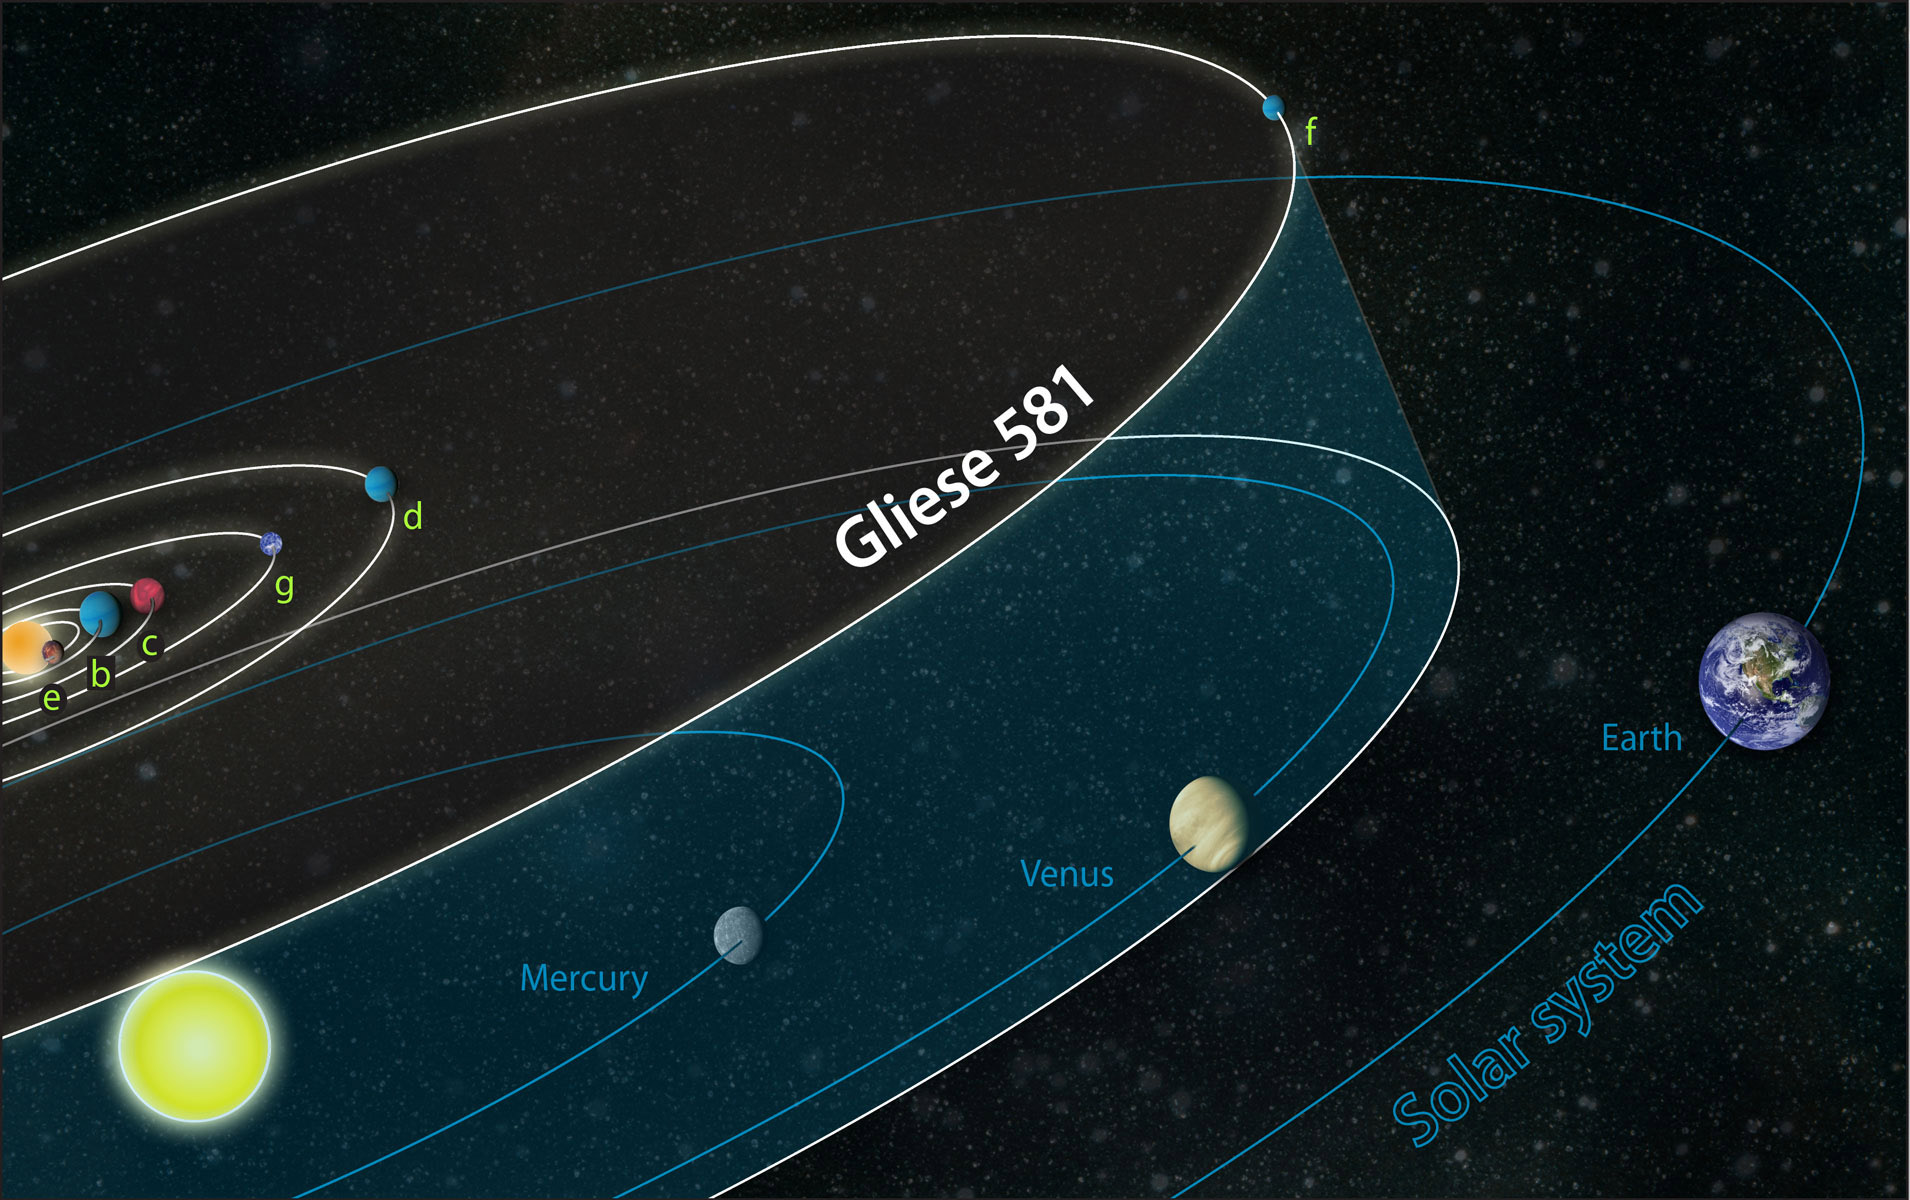 Gliese_581_system_compared_to_solar_system.jpg